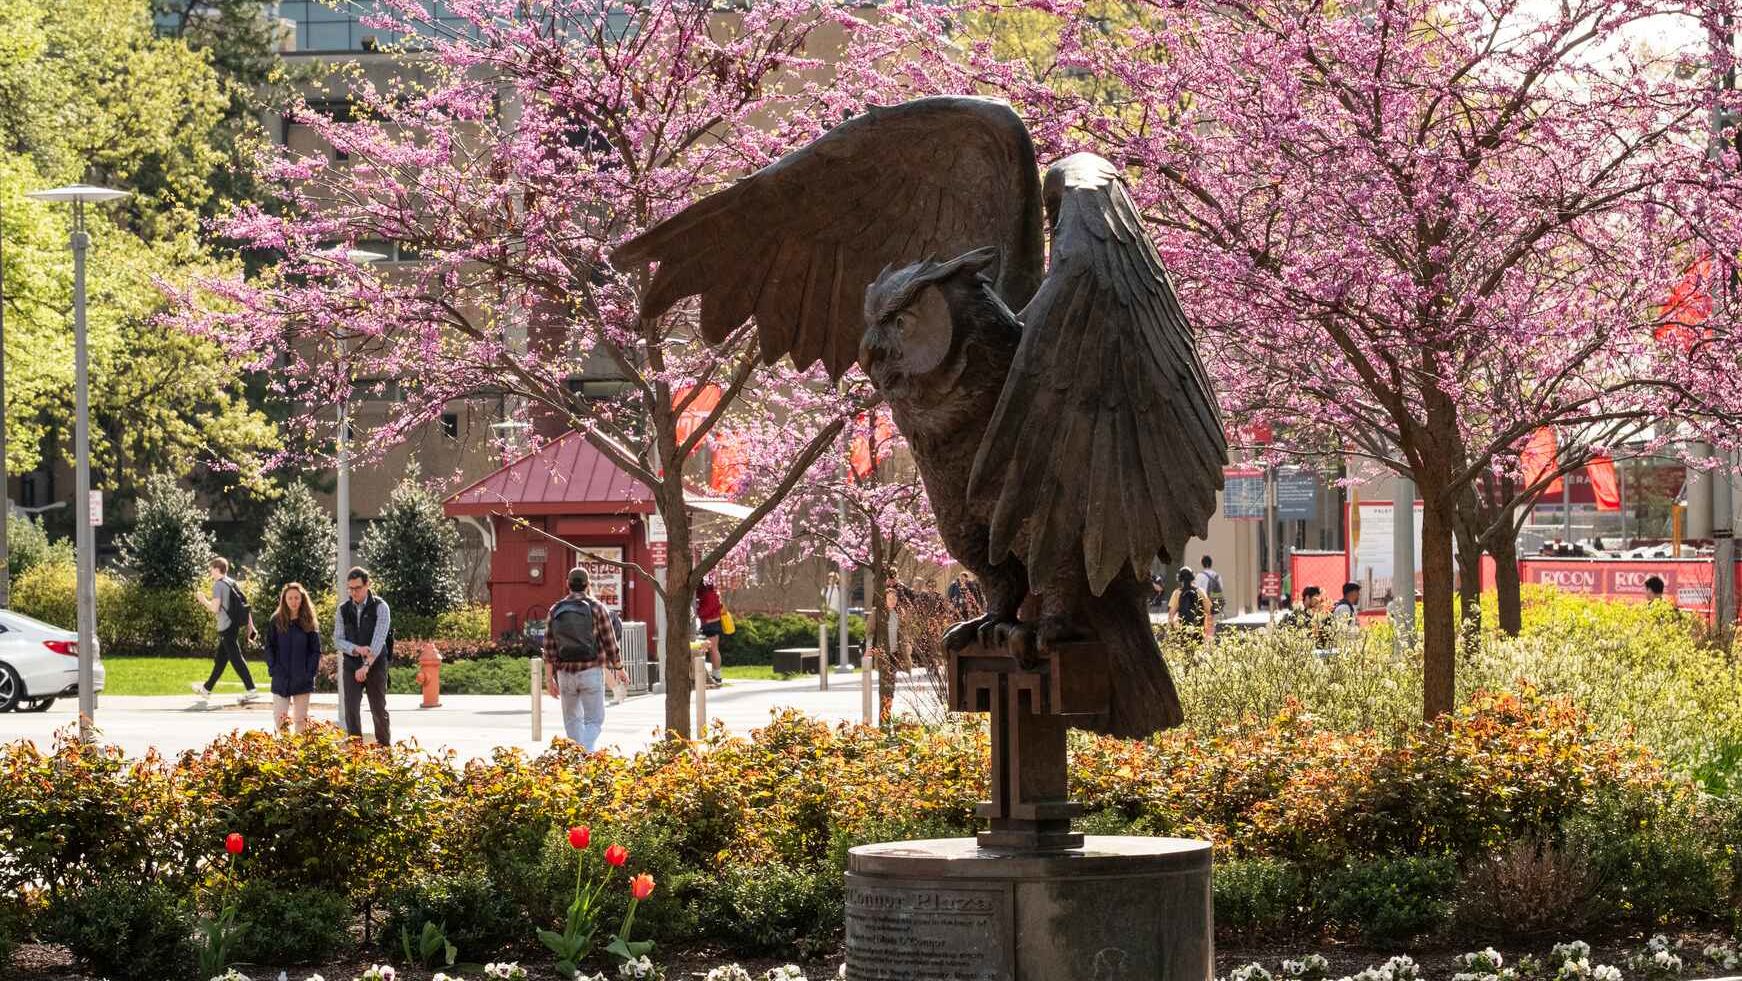 The Temple Owl statue